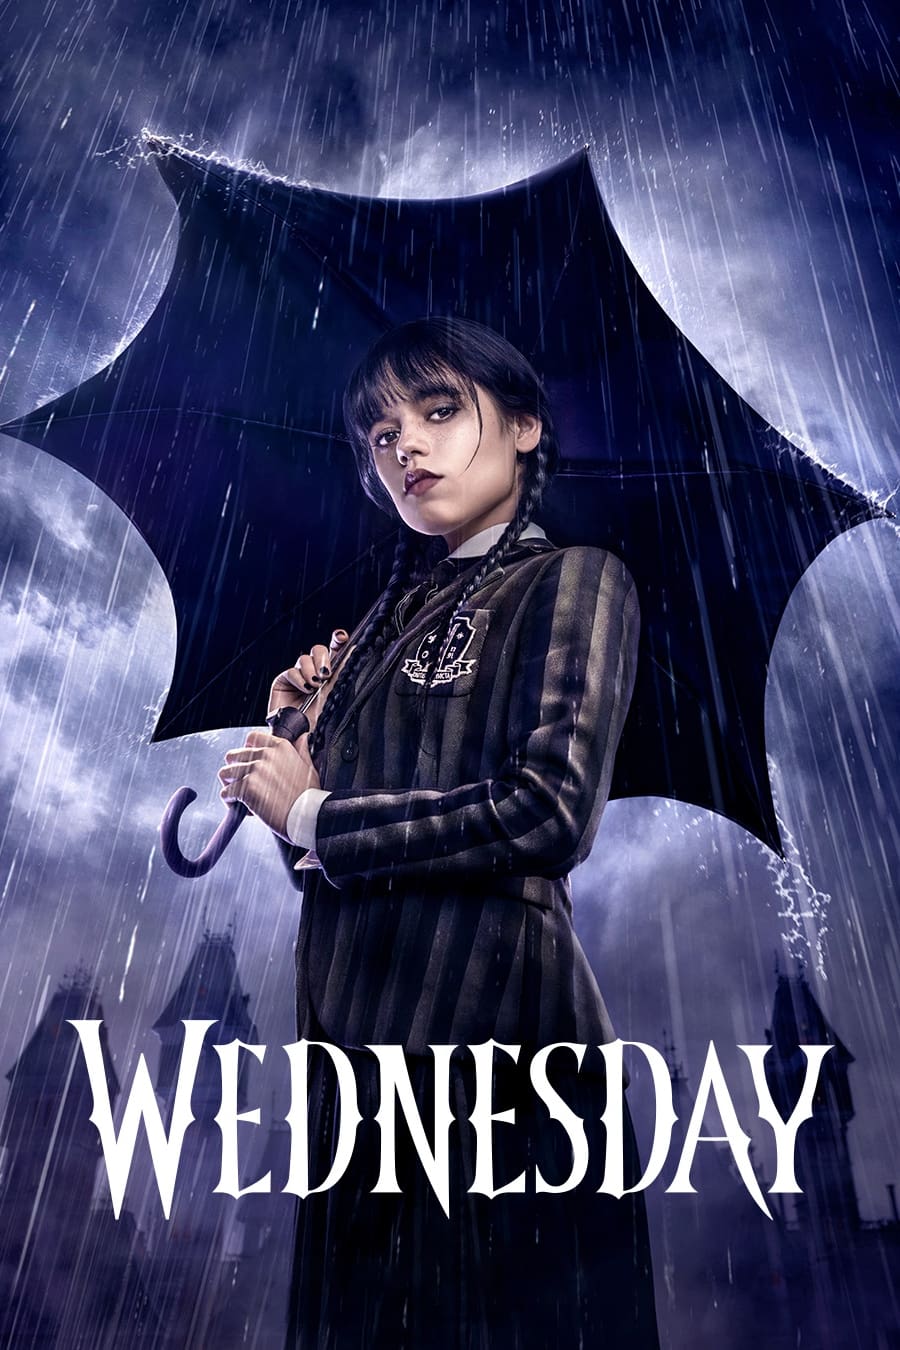 Wednesday (2022) S01 Ep 05 to 08 Complete